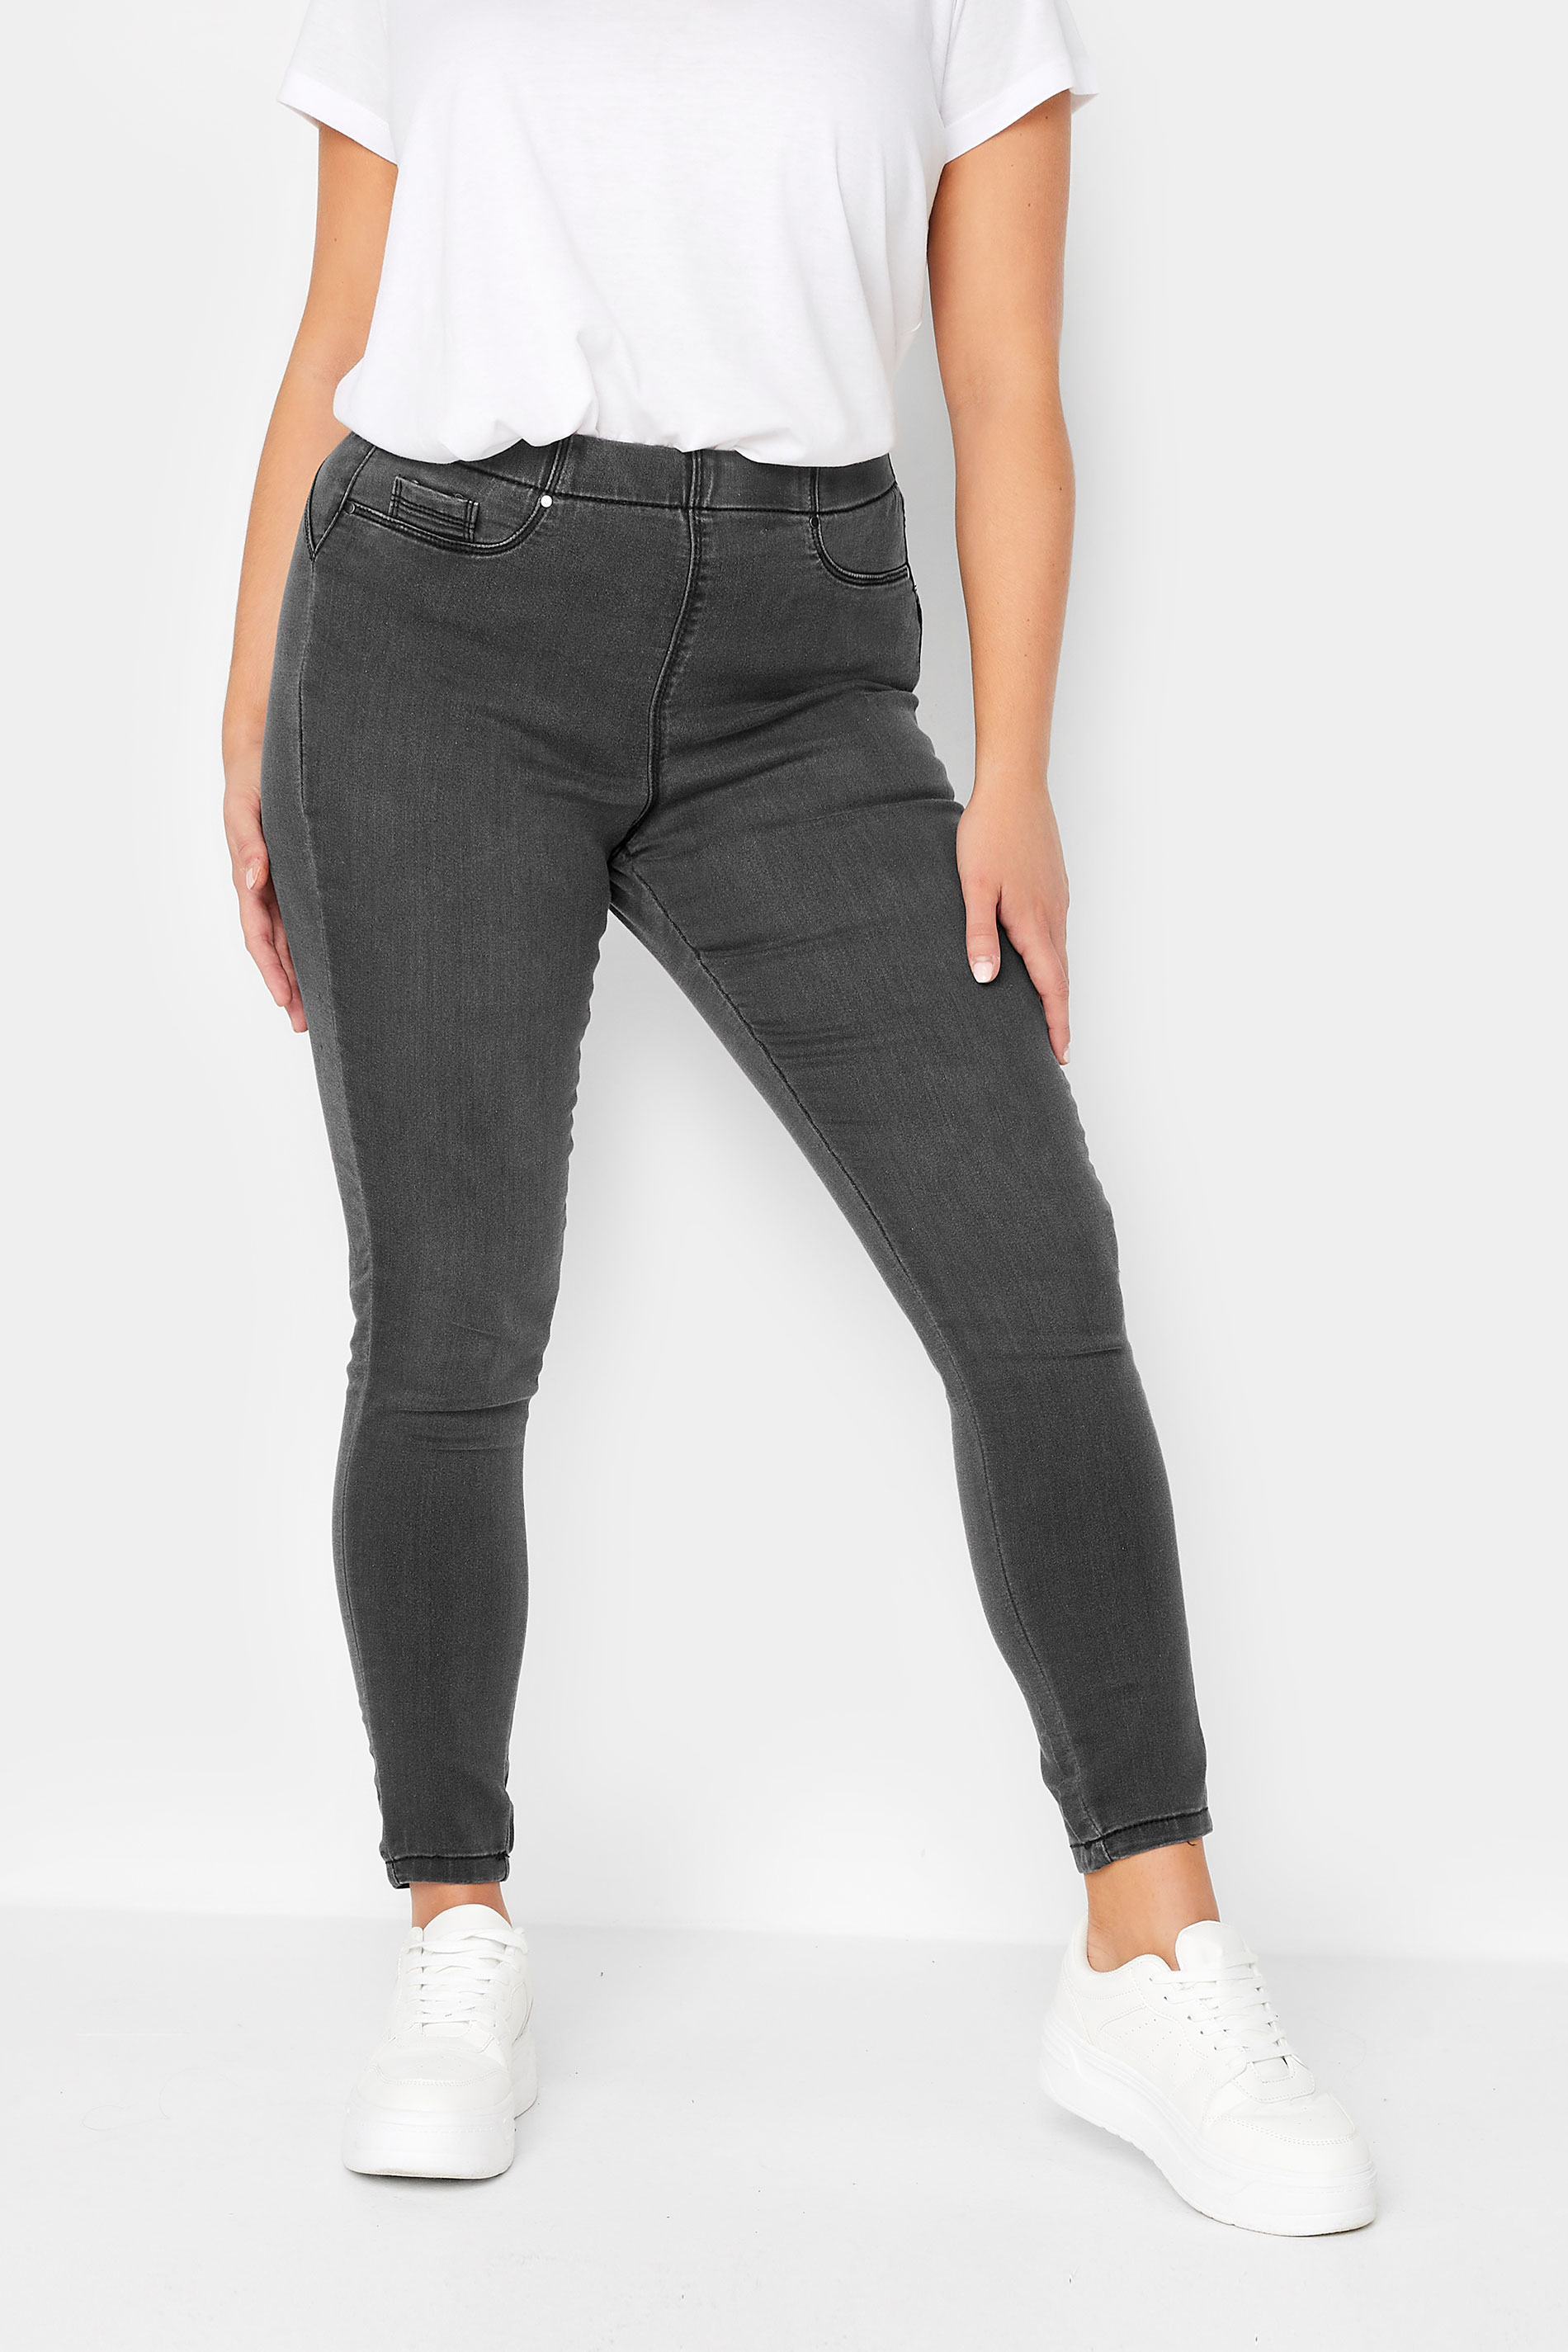 Plus Size Curve Black Washed Pull On Bum Shaper LOLA Jeggings | Yours Clothing 1